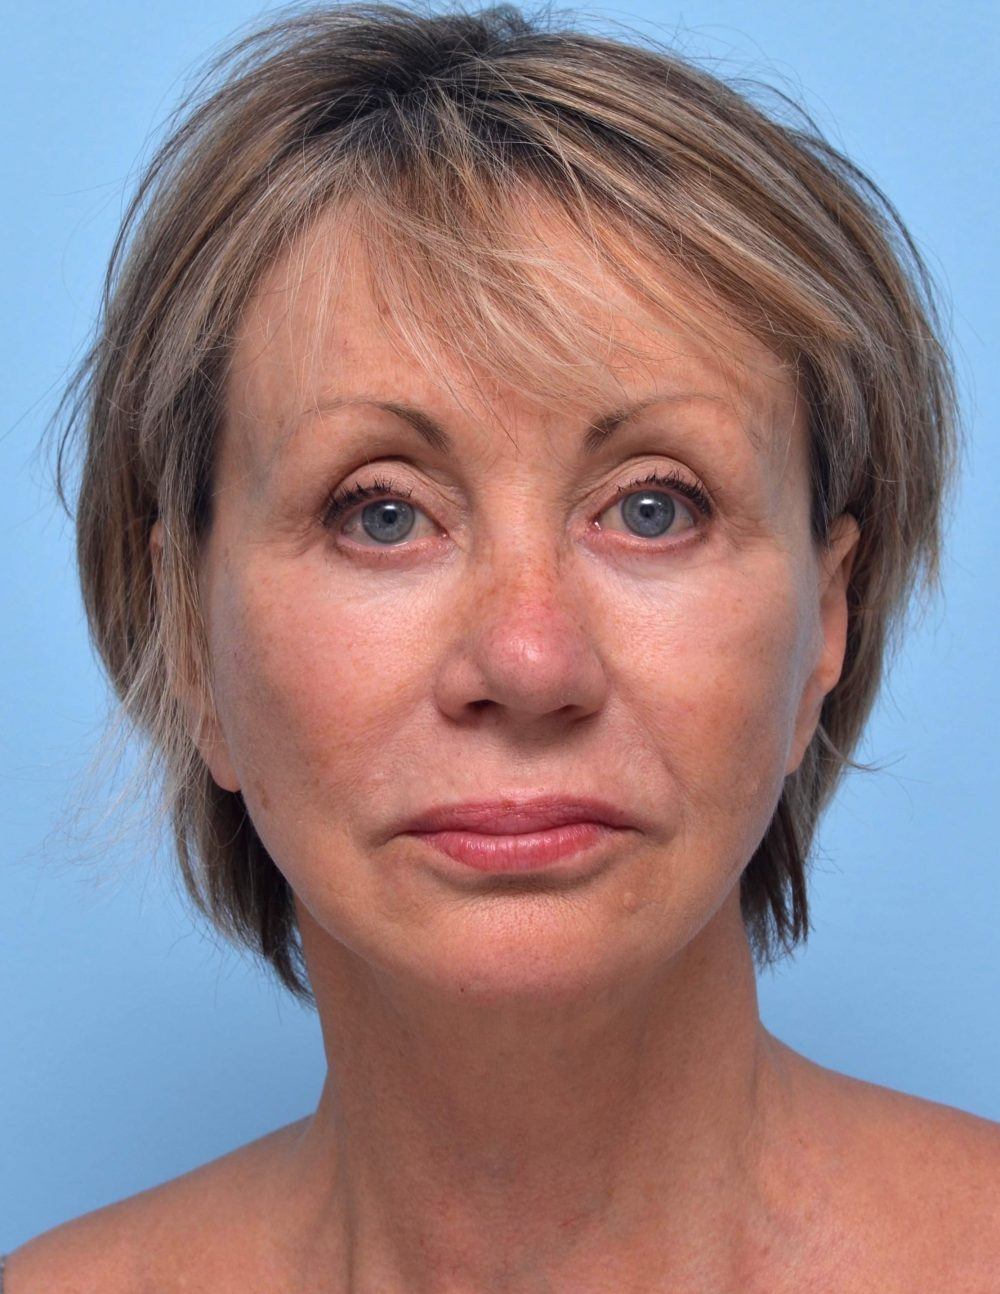 after reducing nasolabial folds with botox